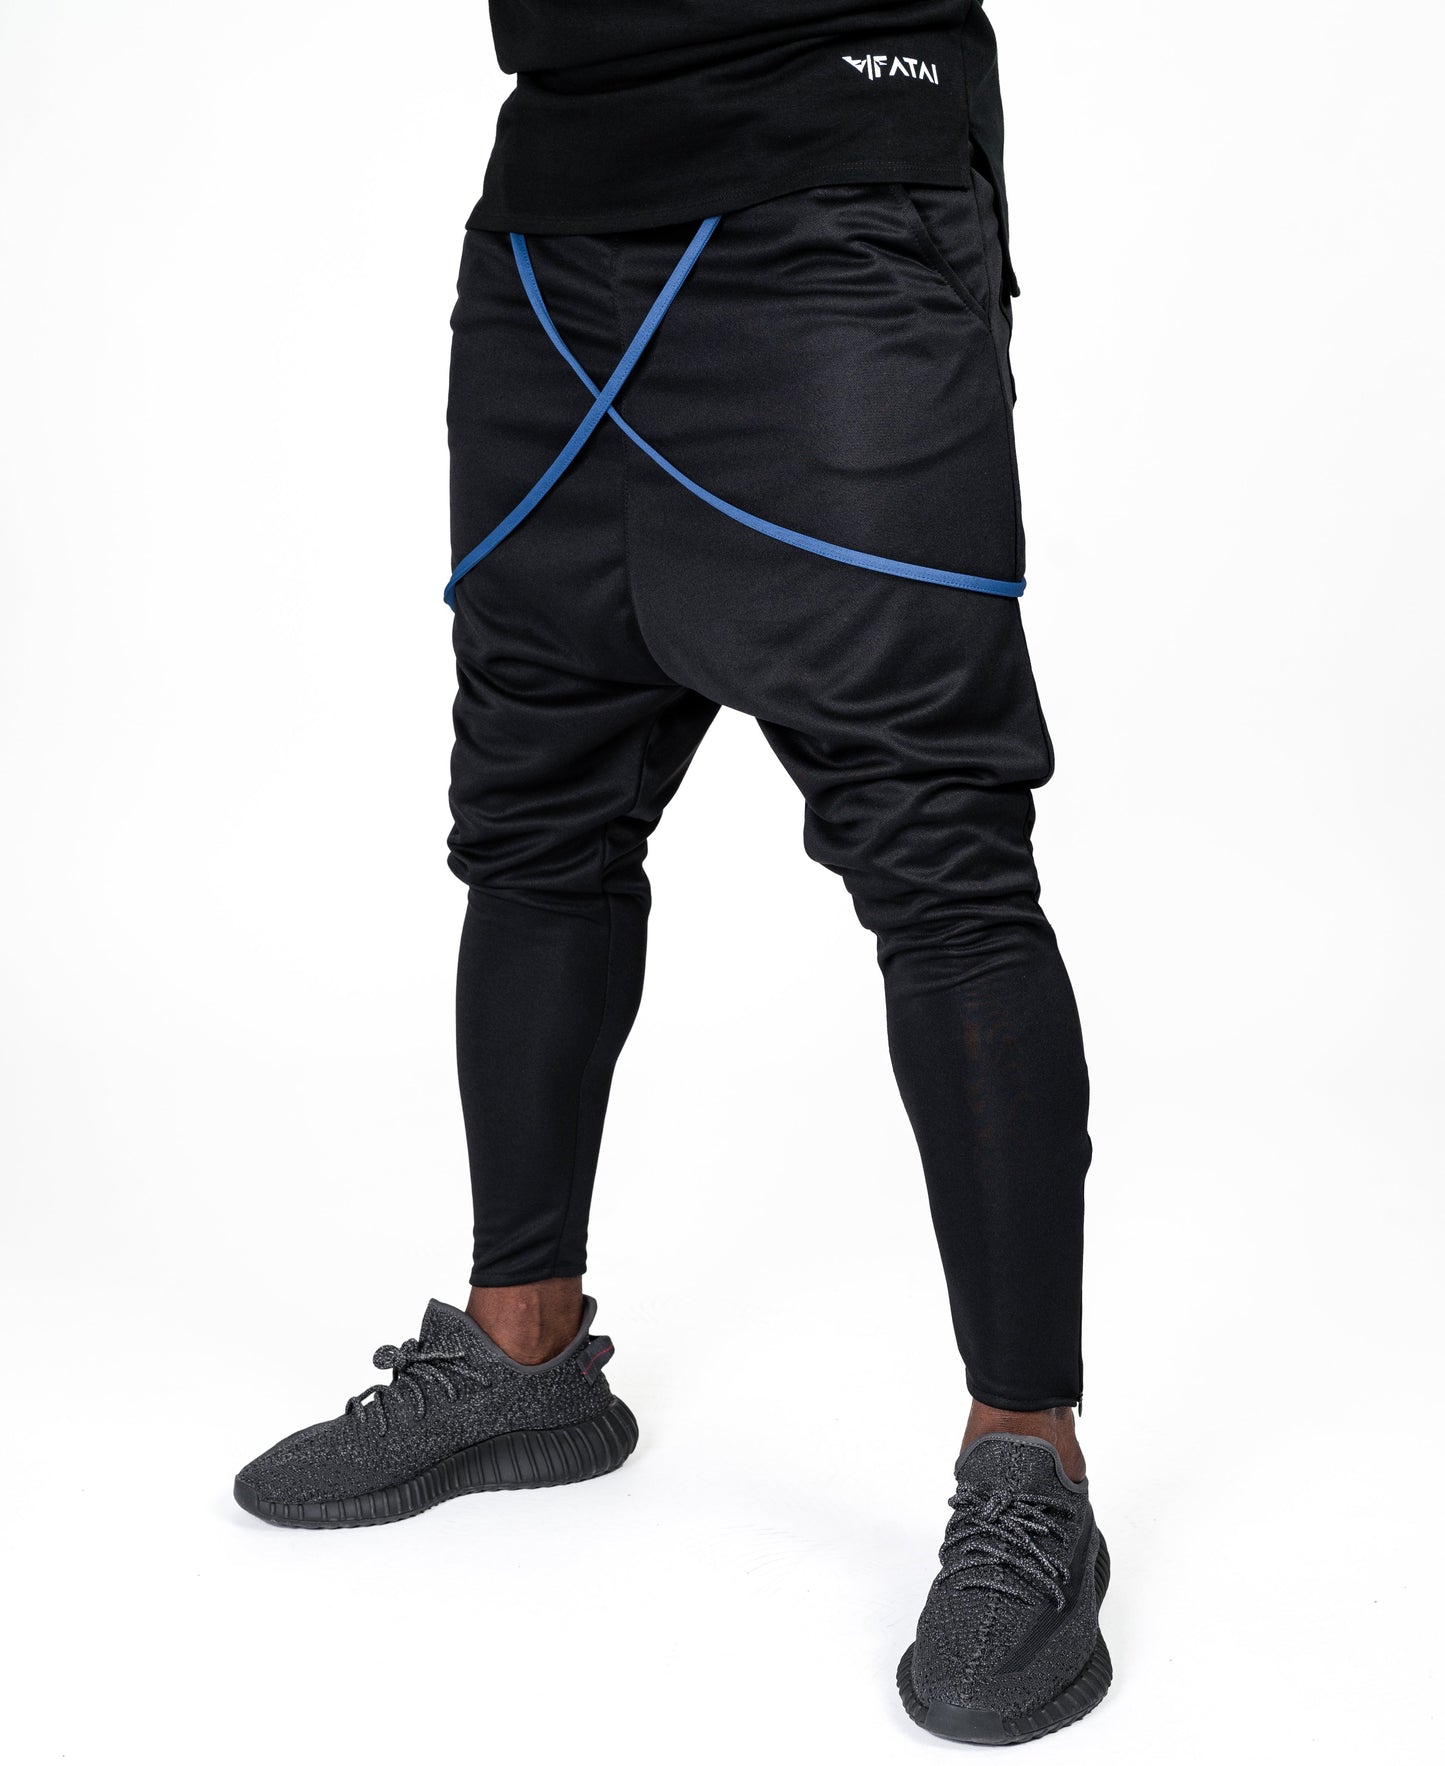 Black trousers with blue design - Fatai Style